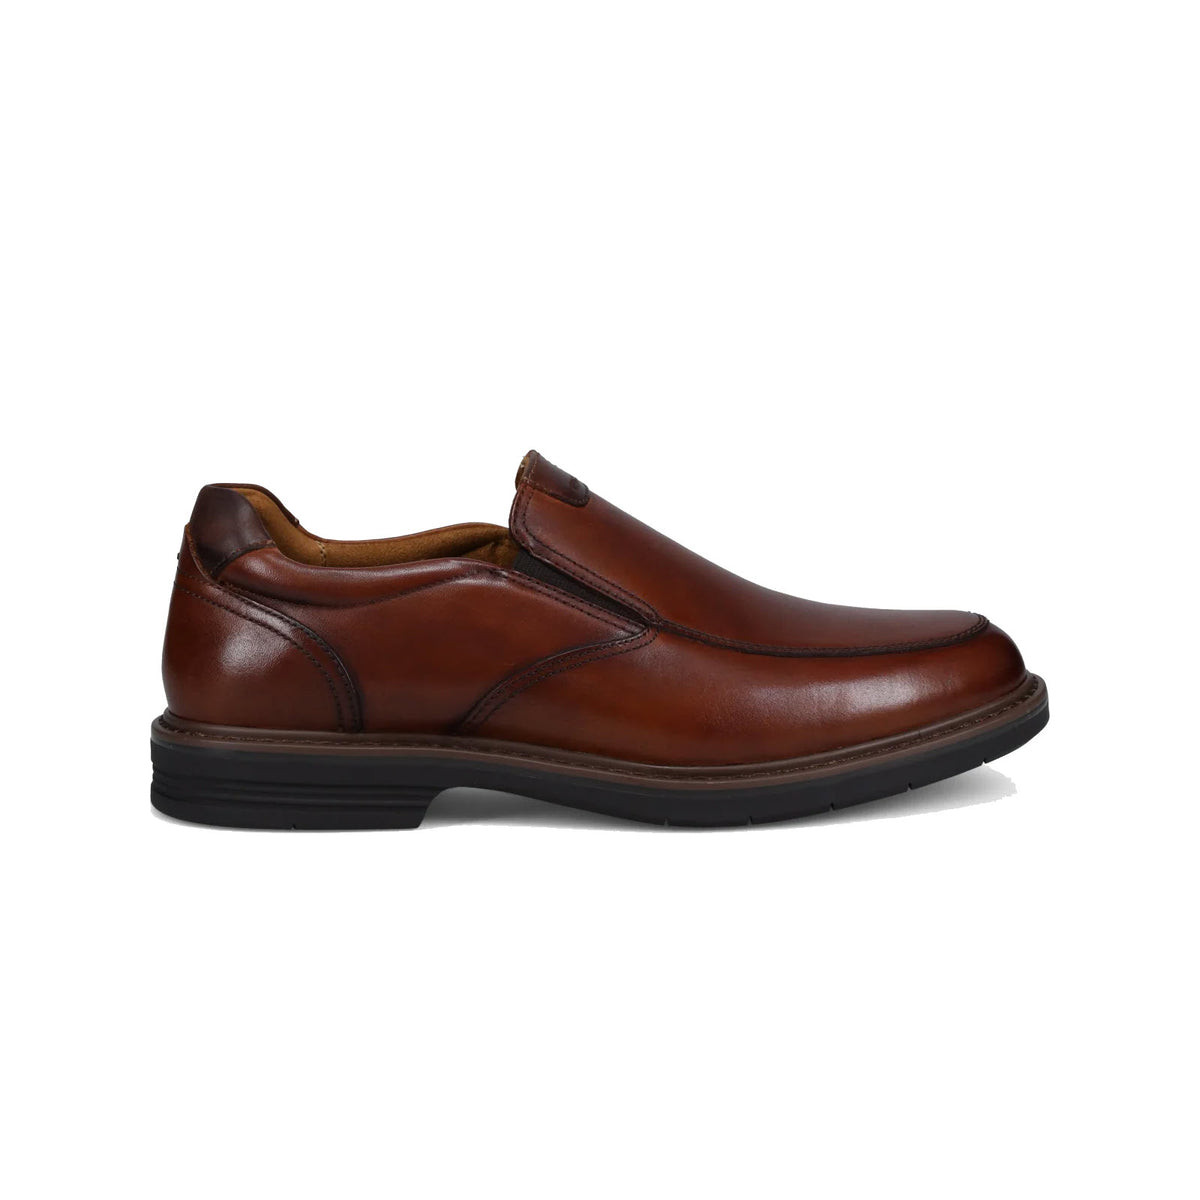 A single brown leather Florsheim Norwalk Moc Toe Slip On Cognac men&#39;s dress shoe with elastic side panels and a black sole, displayed against a white background.